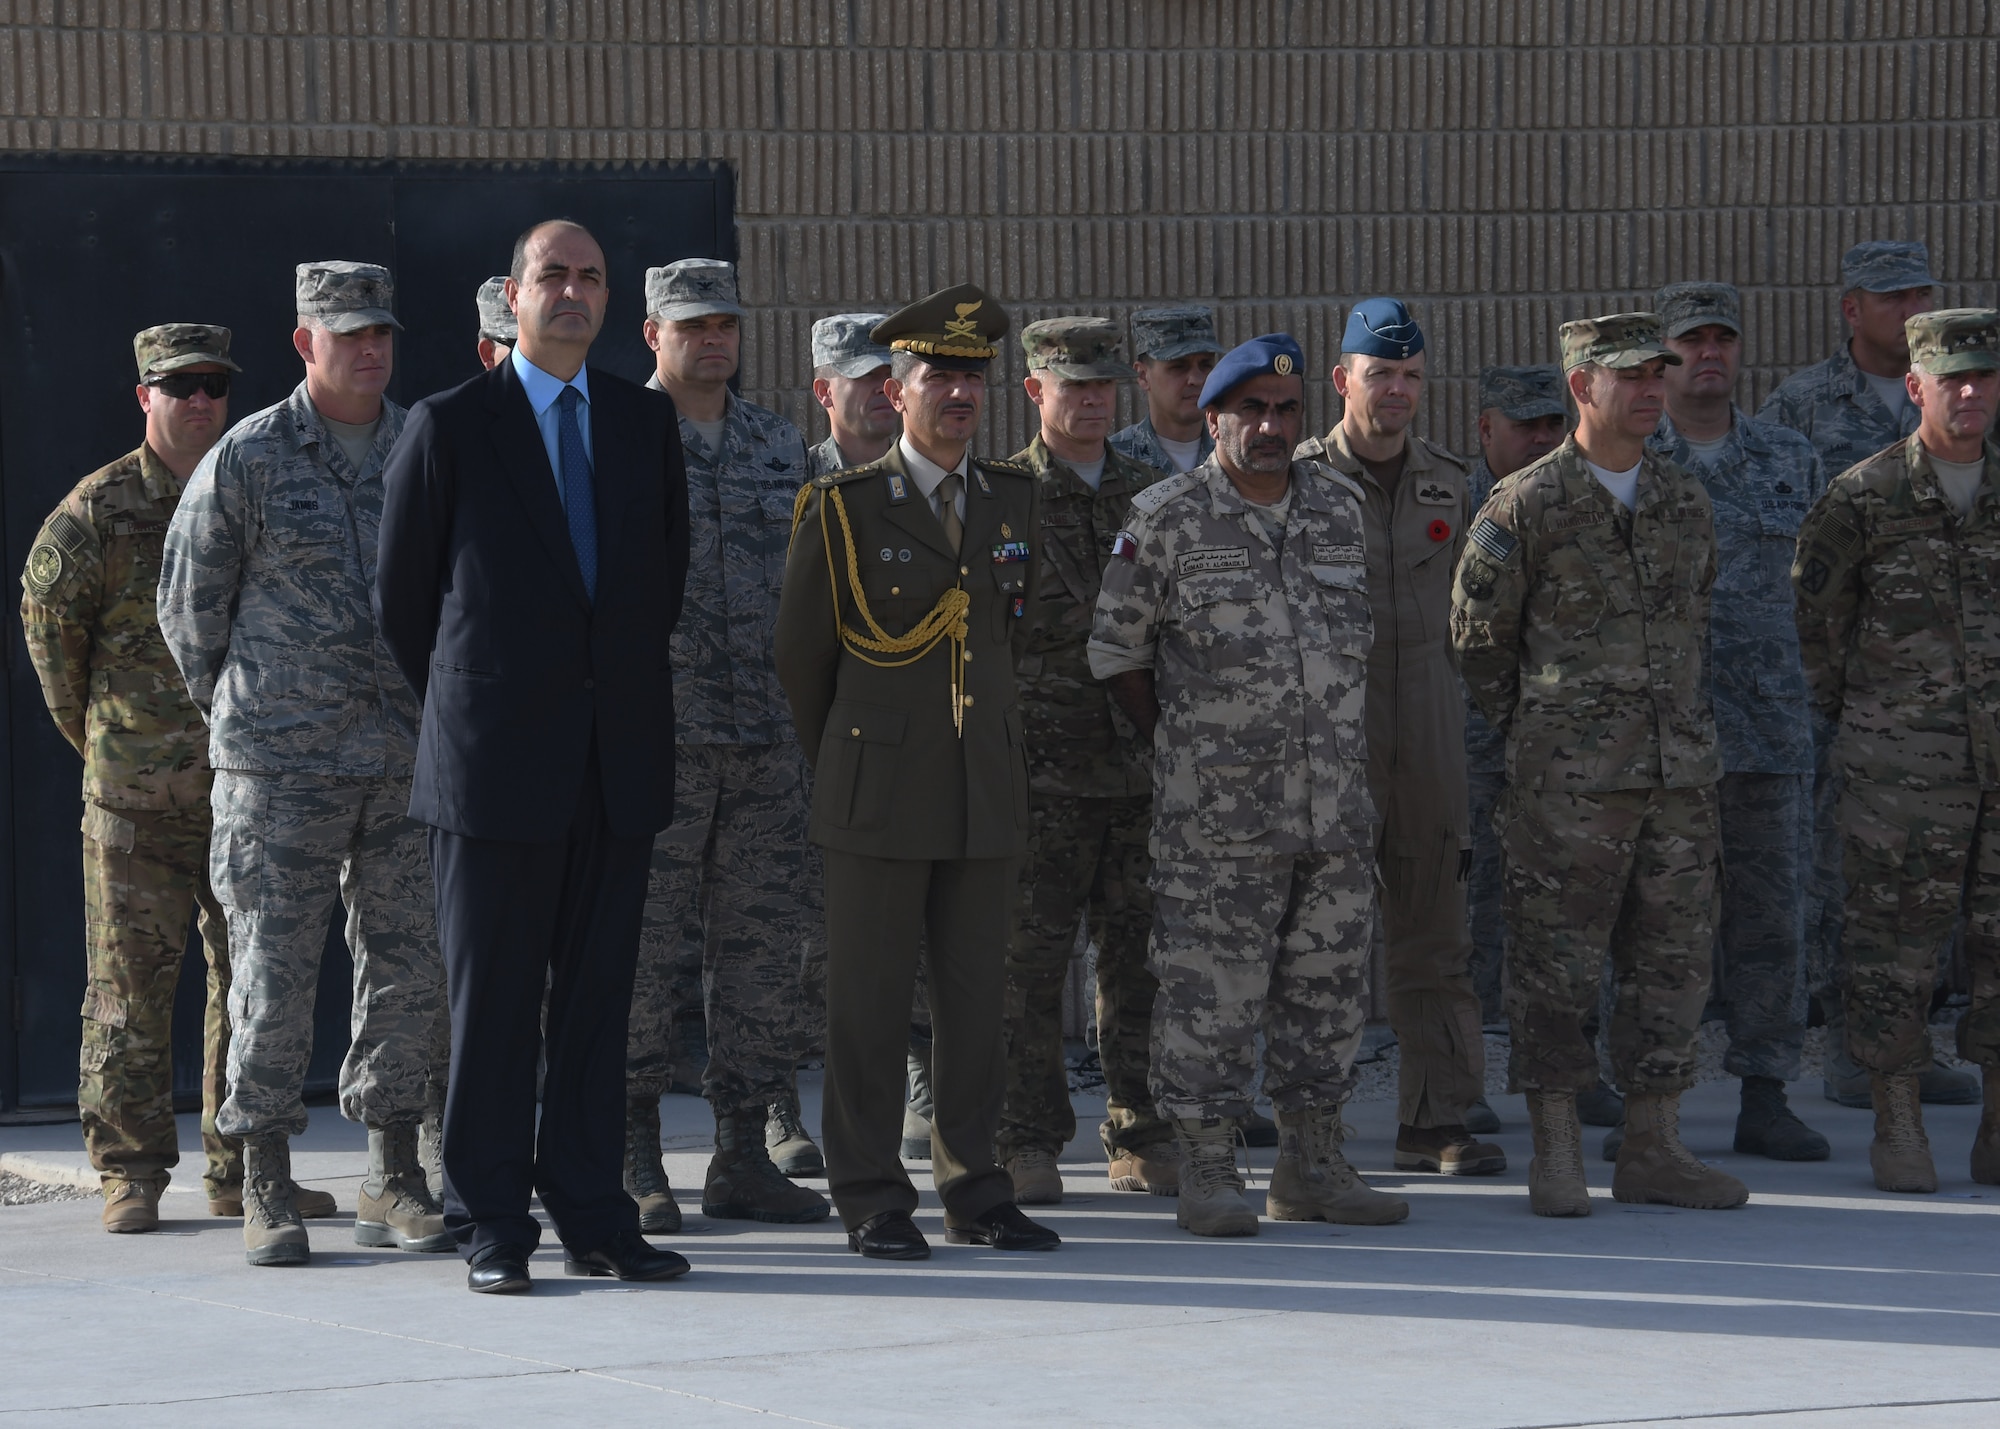 Distinguished guests and representatives from across Al Udeid Air Base, Qatar, stand together during a ceremony Nov. 4, 2016. The ceremony was in recognition of Italian Armed Forces Day and involved the raising of the Italian flag, as well as a moment of silence for those who served in the Armed Forces. (U.S. Air Force photo by Senior Airman Miles Wilson)